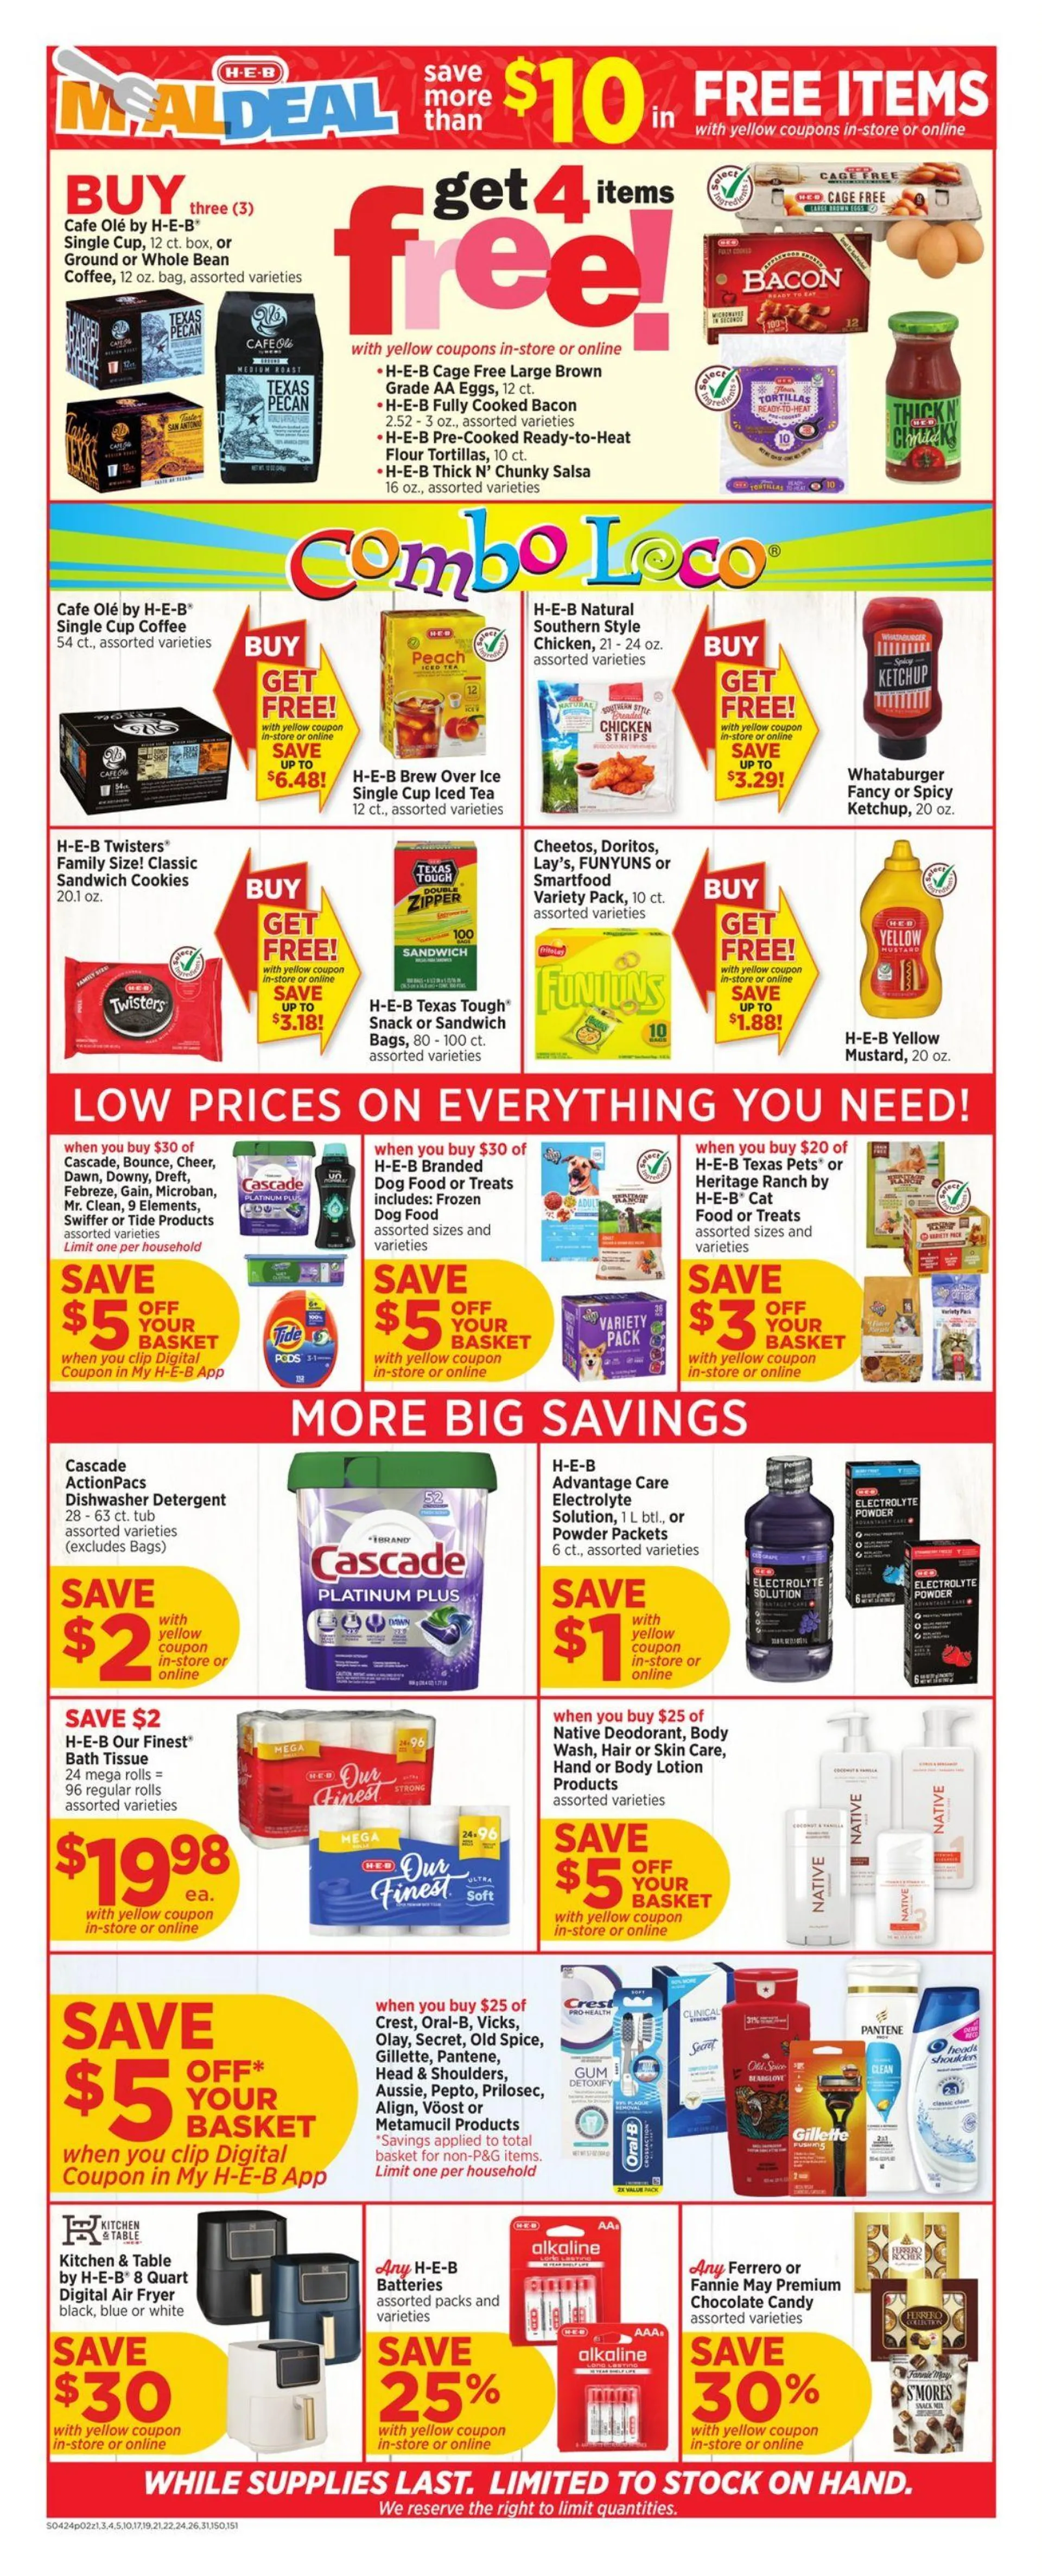 H-E-B Current weekly ad - 2